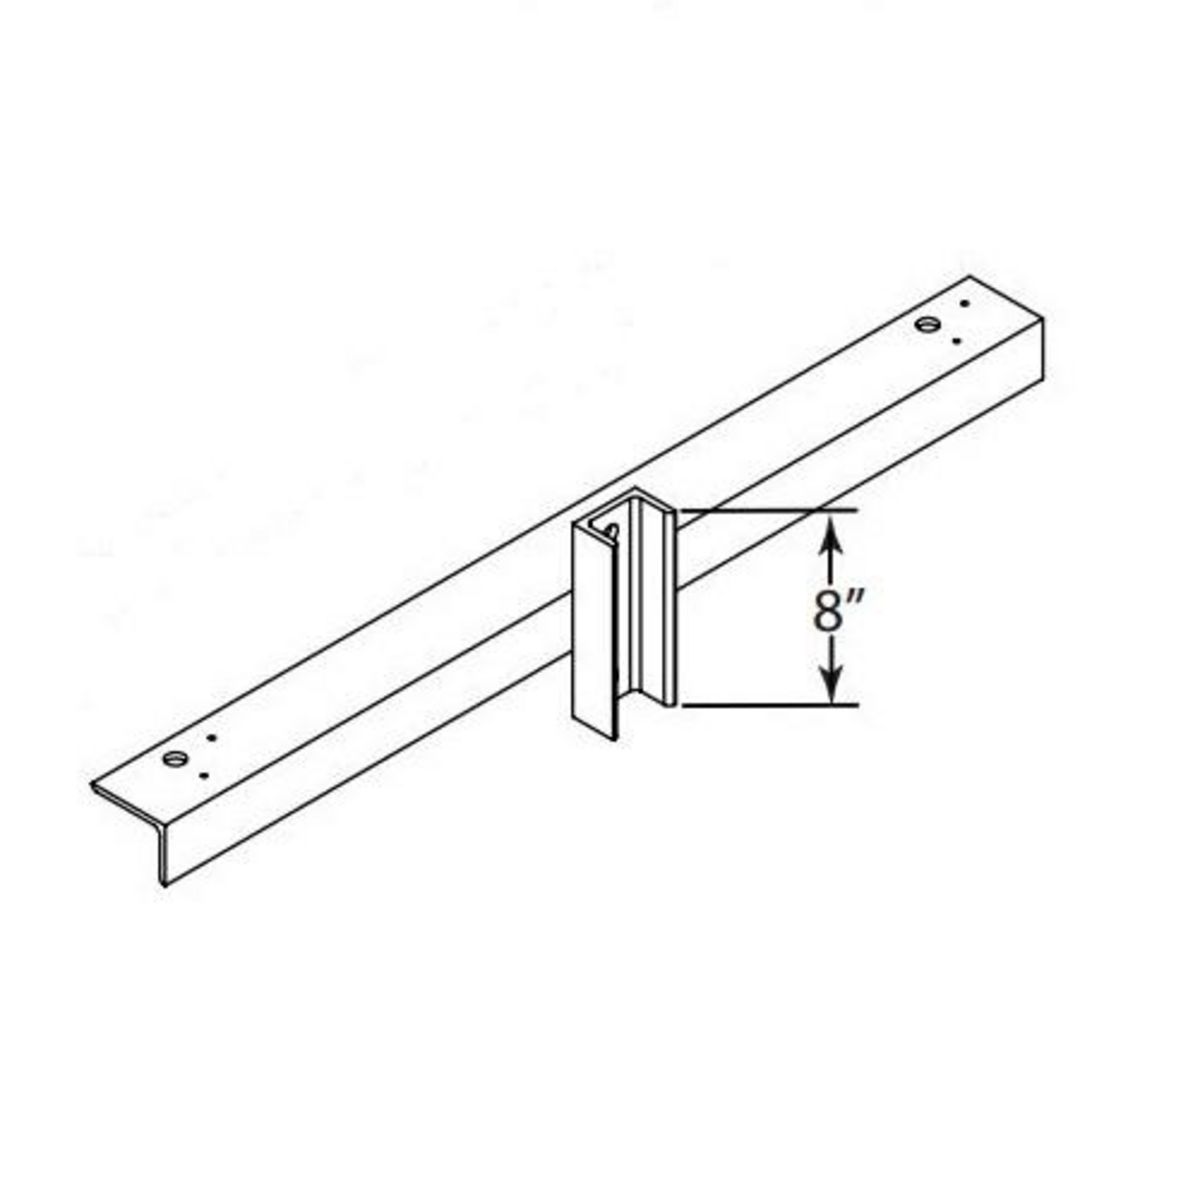 Mount Accessory, wood pole, 2 fixtures